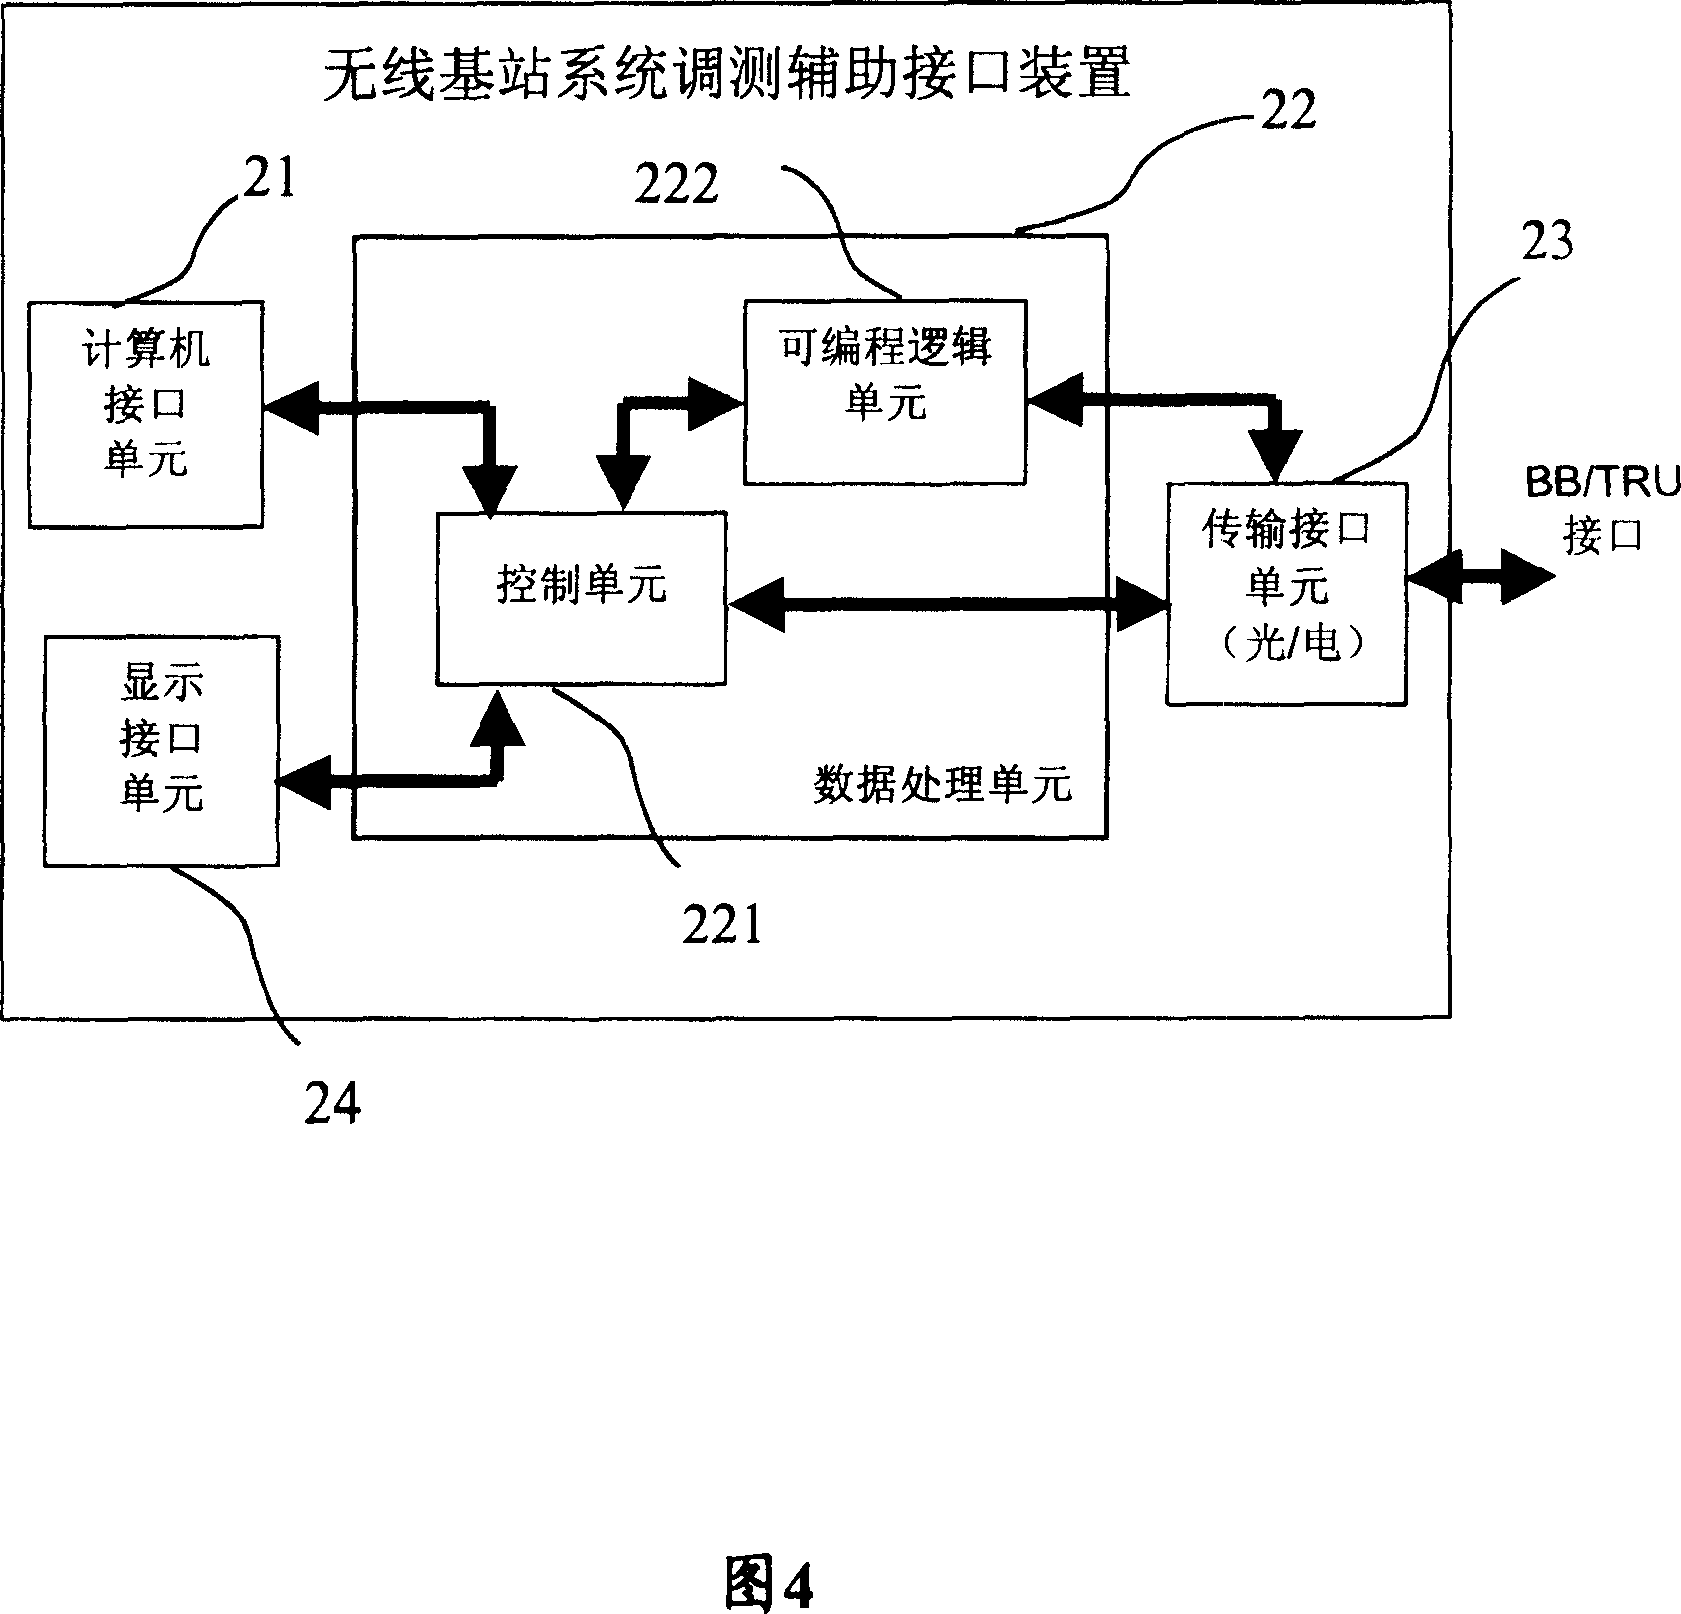 Reglation testing axiliary interface device of radio base station and testing system using it